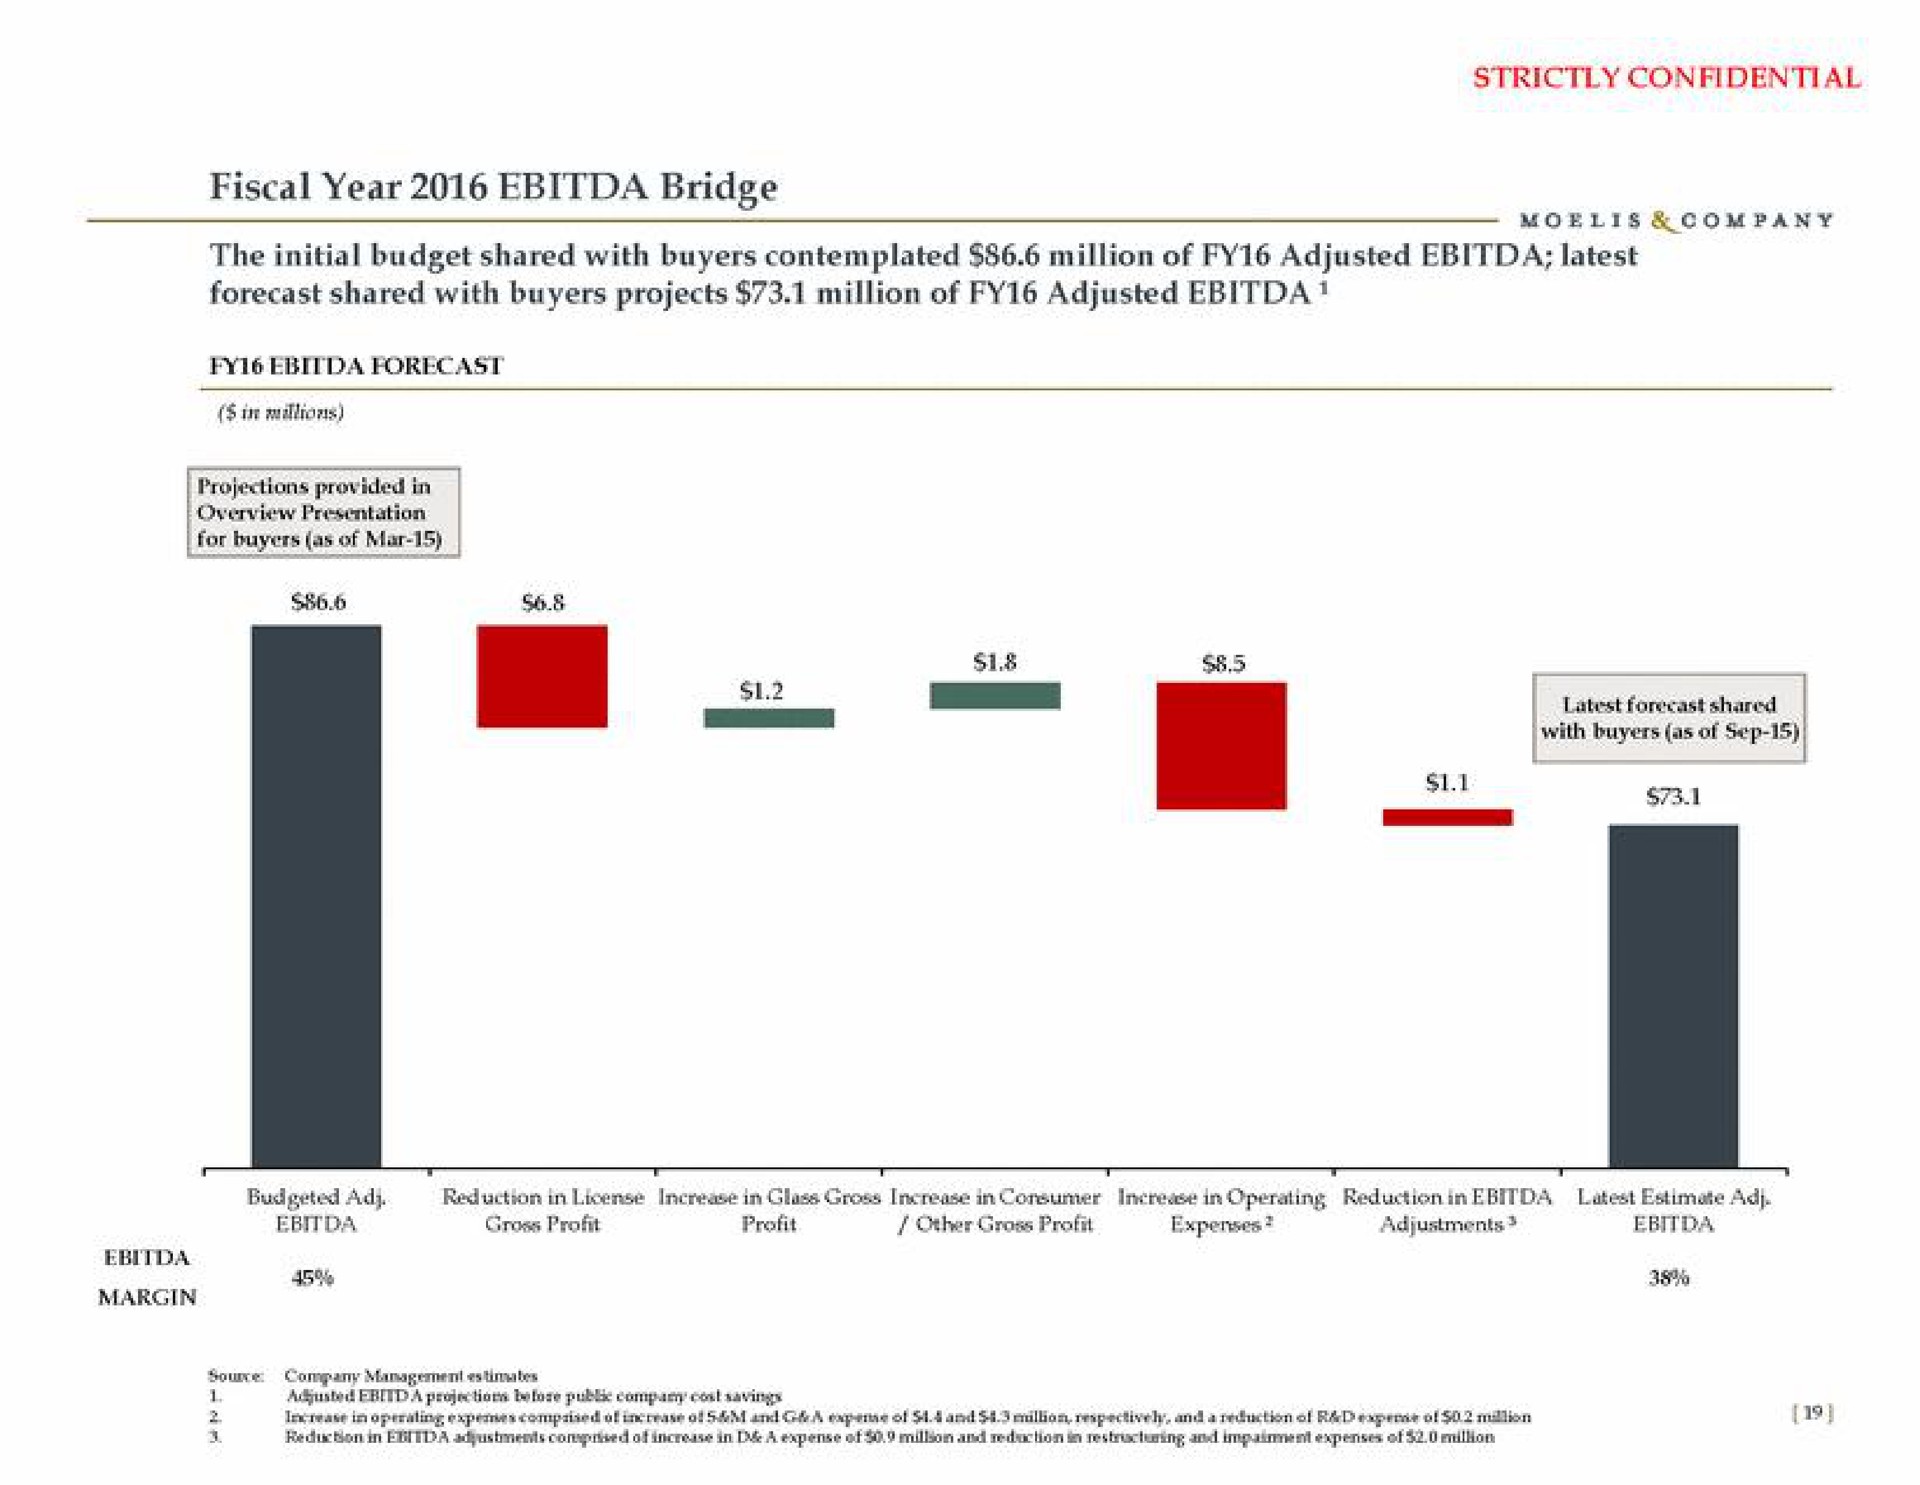 fiscal year bridge projections provided in | Moelis & Company